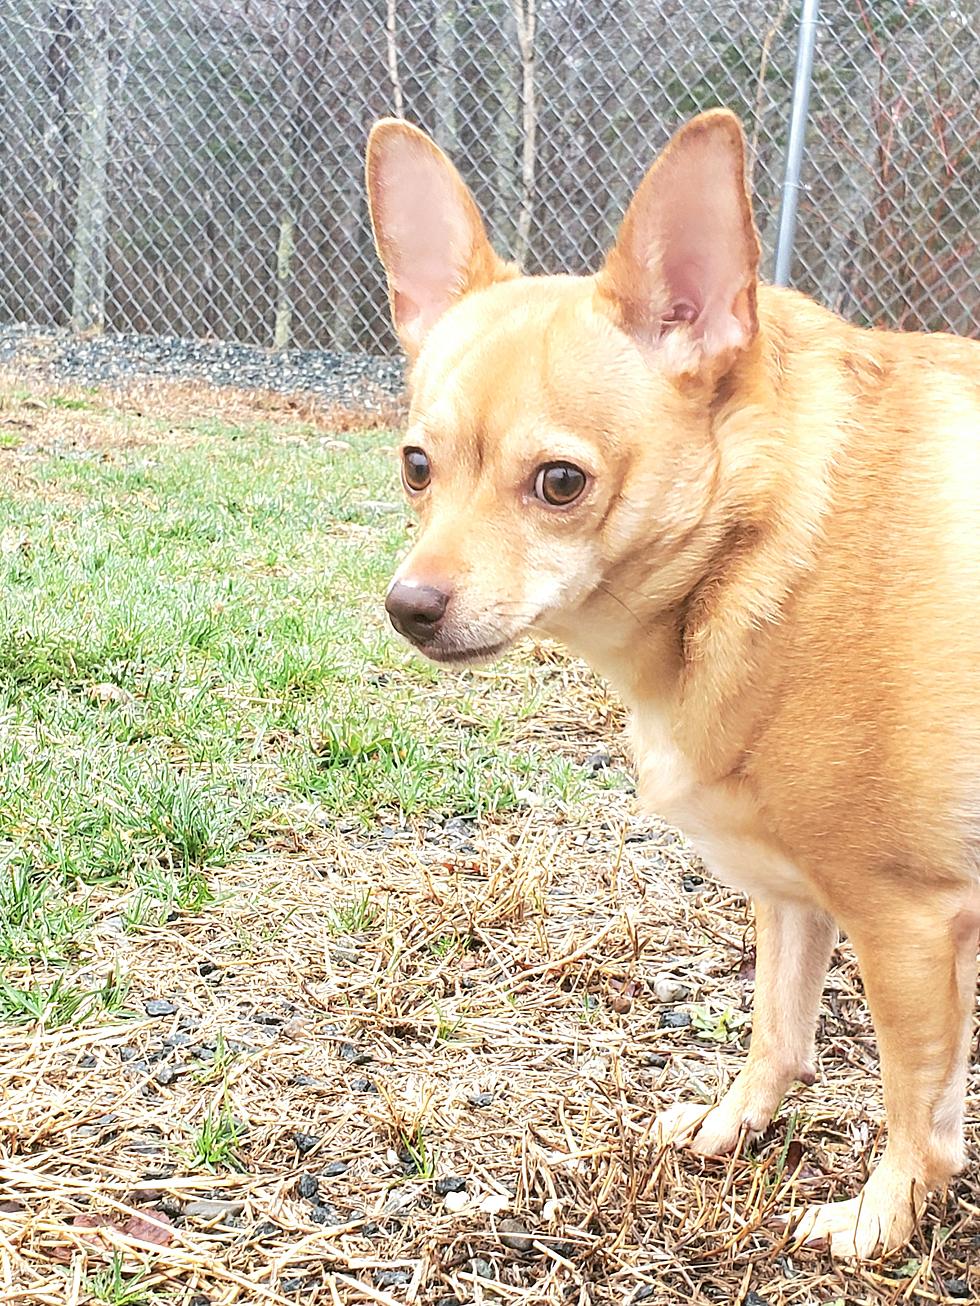 Sweet Little Coco Wants To Be Your New Snuggle Buddy